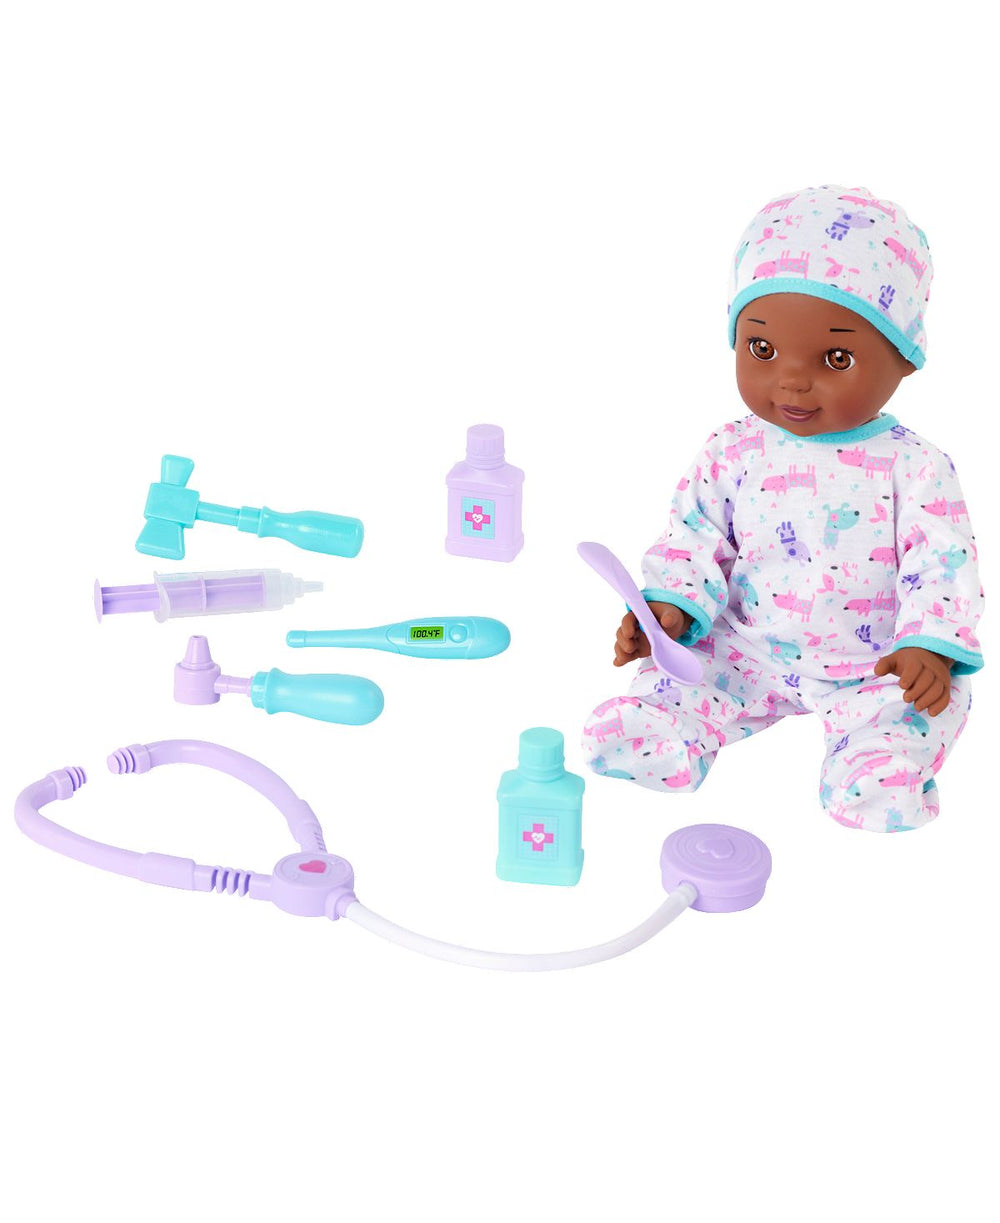 You & Me 14 inch Get Well Baby Doll with Medical Accessories